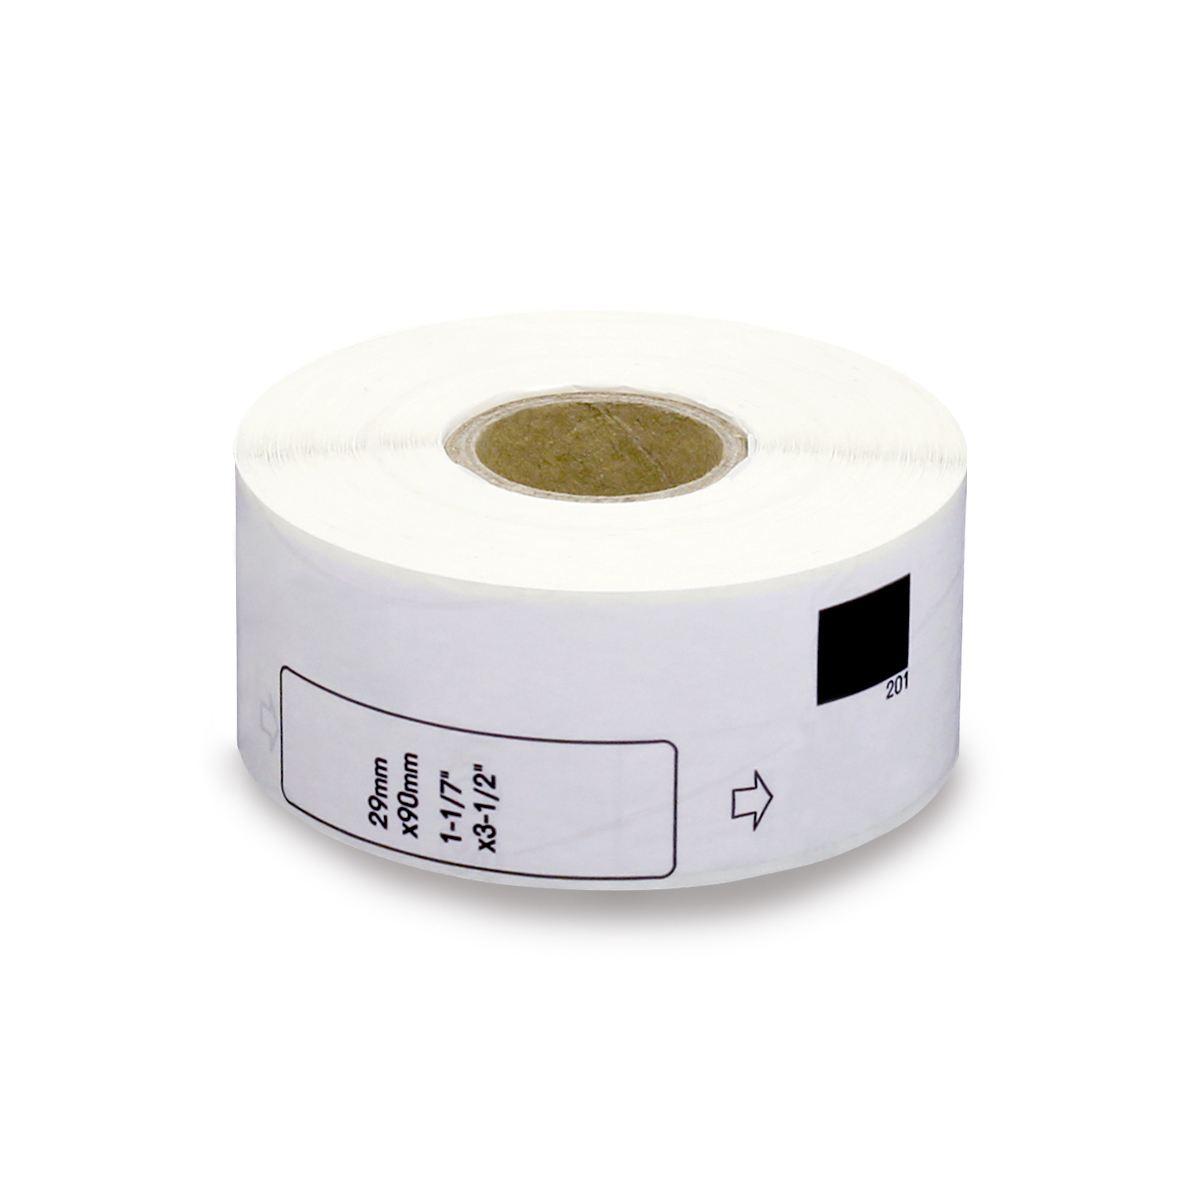 10 Rolls Compatible Brother DK-1201 Standard Address Labels 1-1/7 x 3-1/2 BETCKEY , 29mm x 90mm 4000 Labels With Refillable Cartridge Frame 